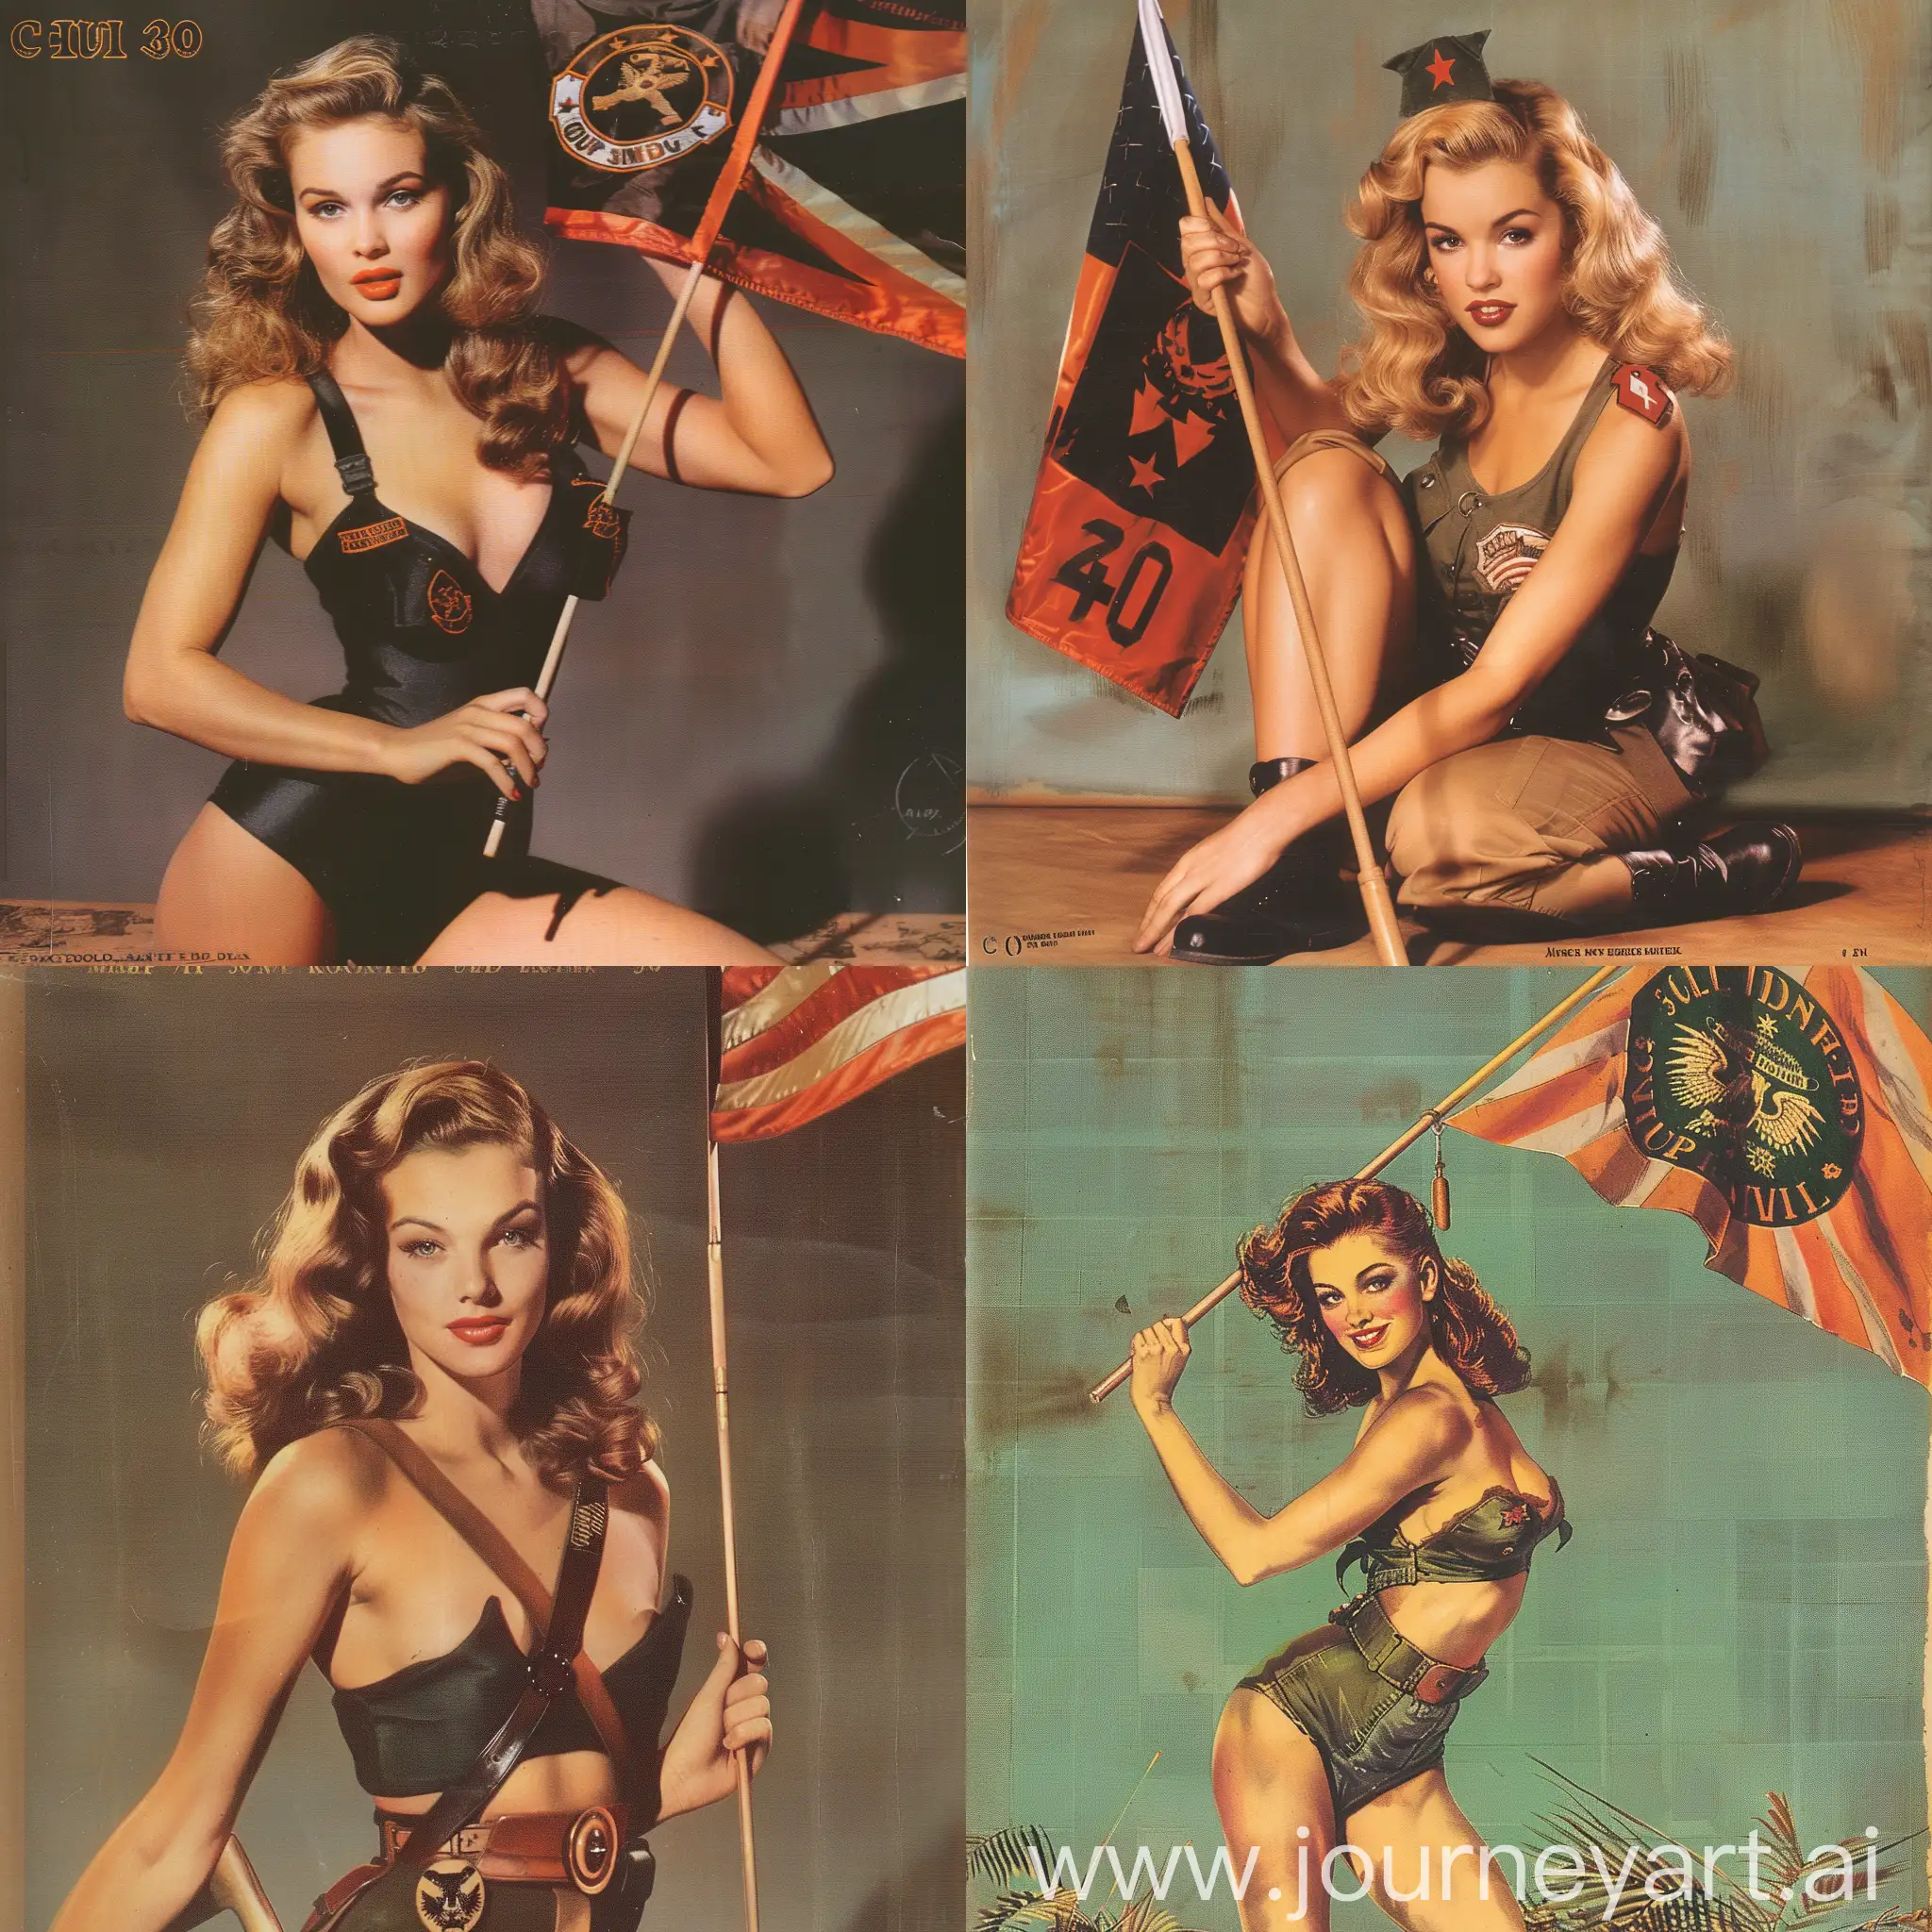 pinup woomen with 30 division flag